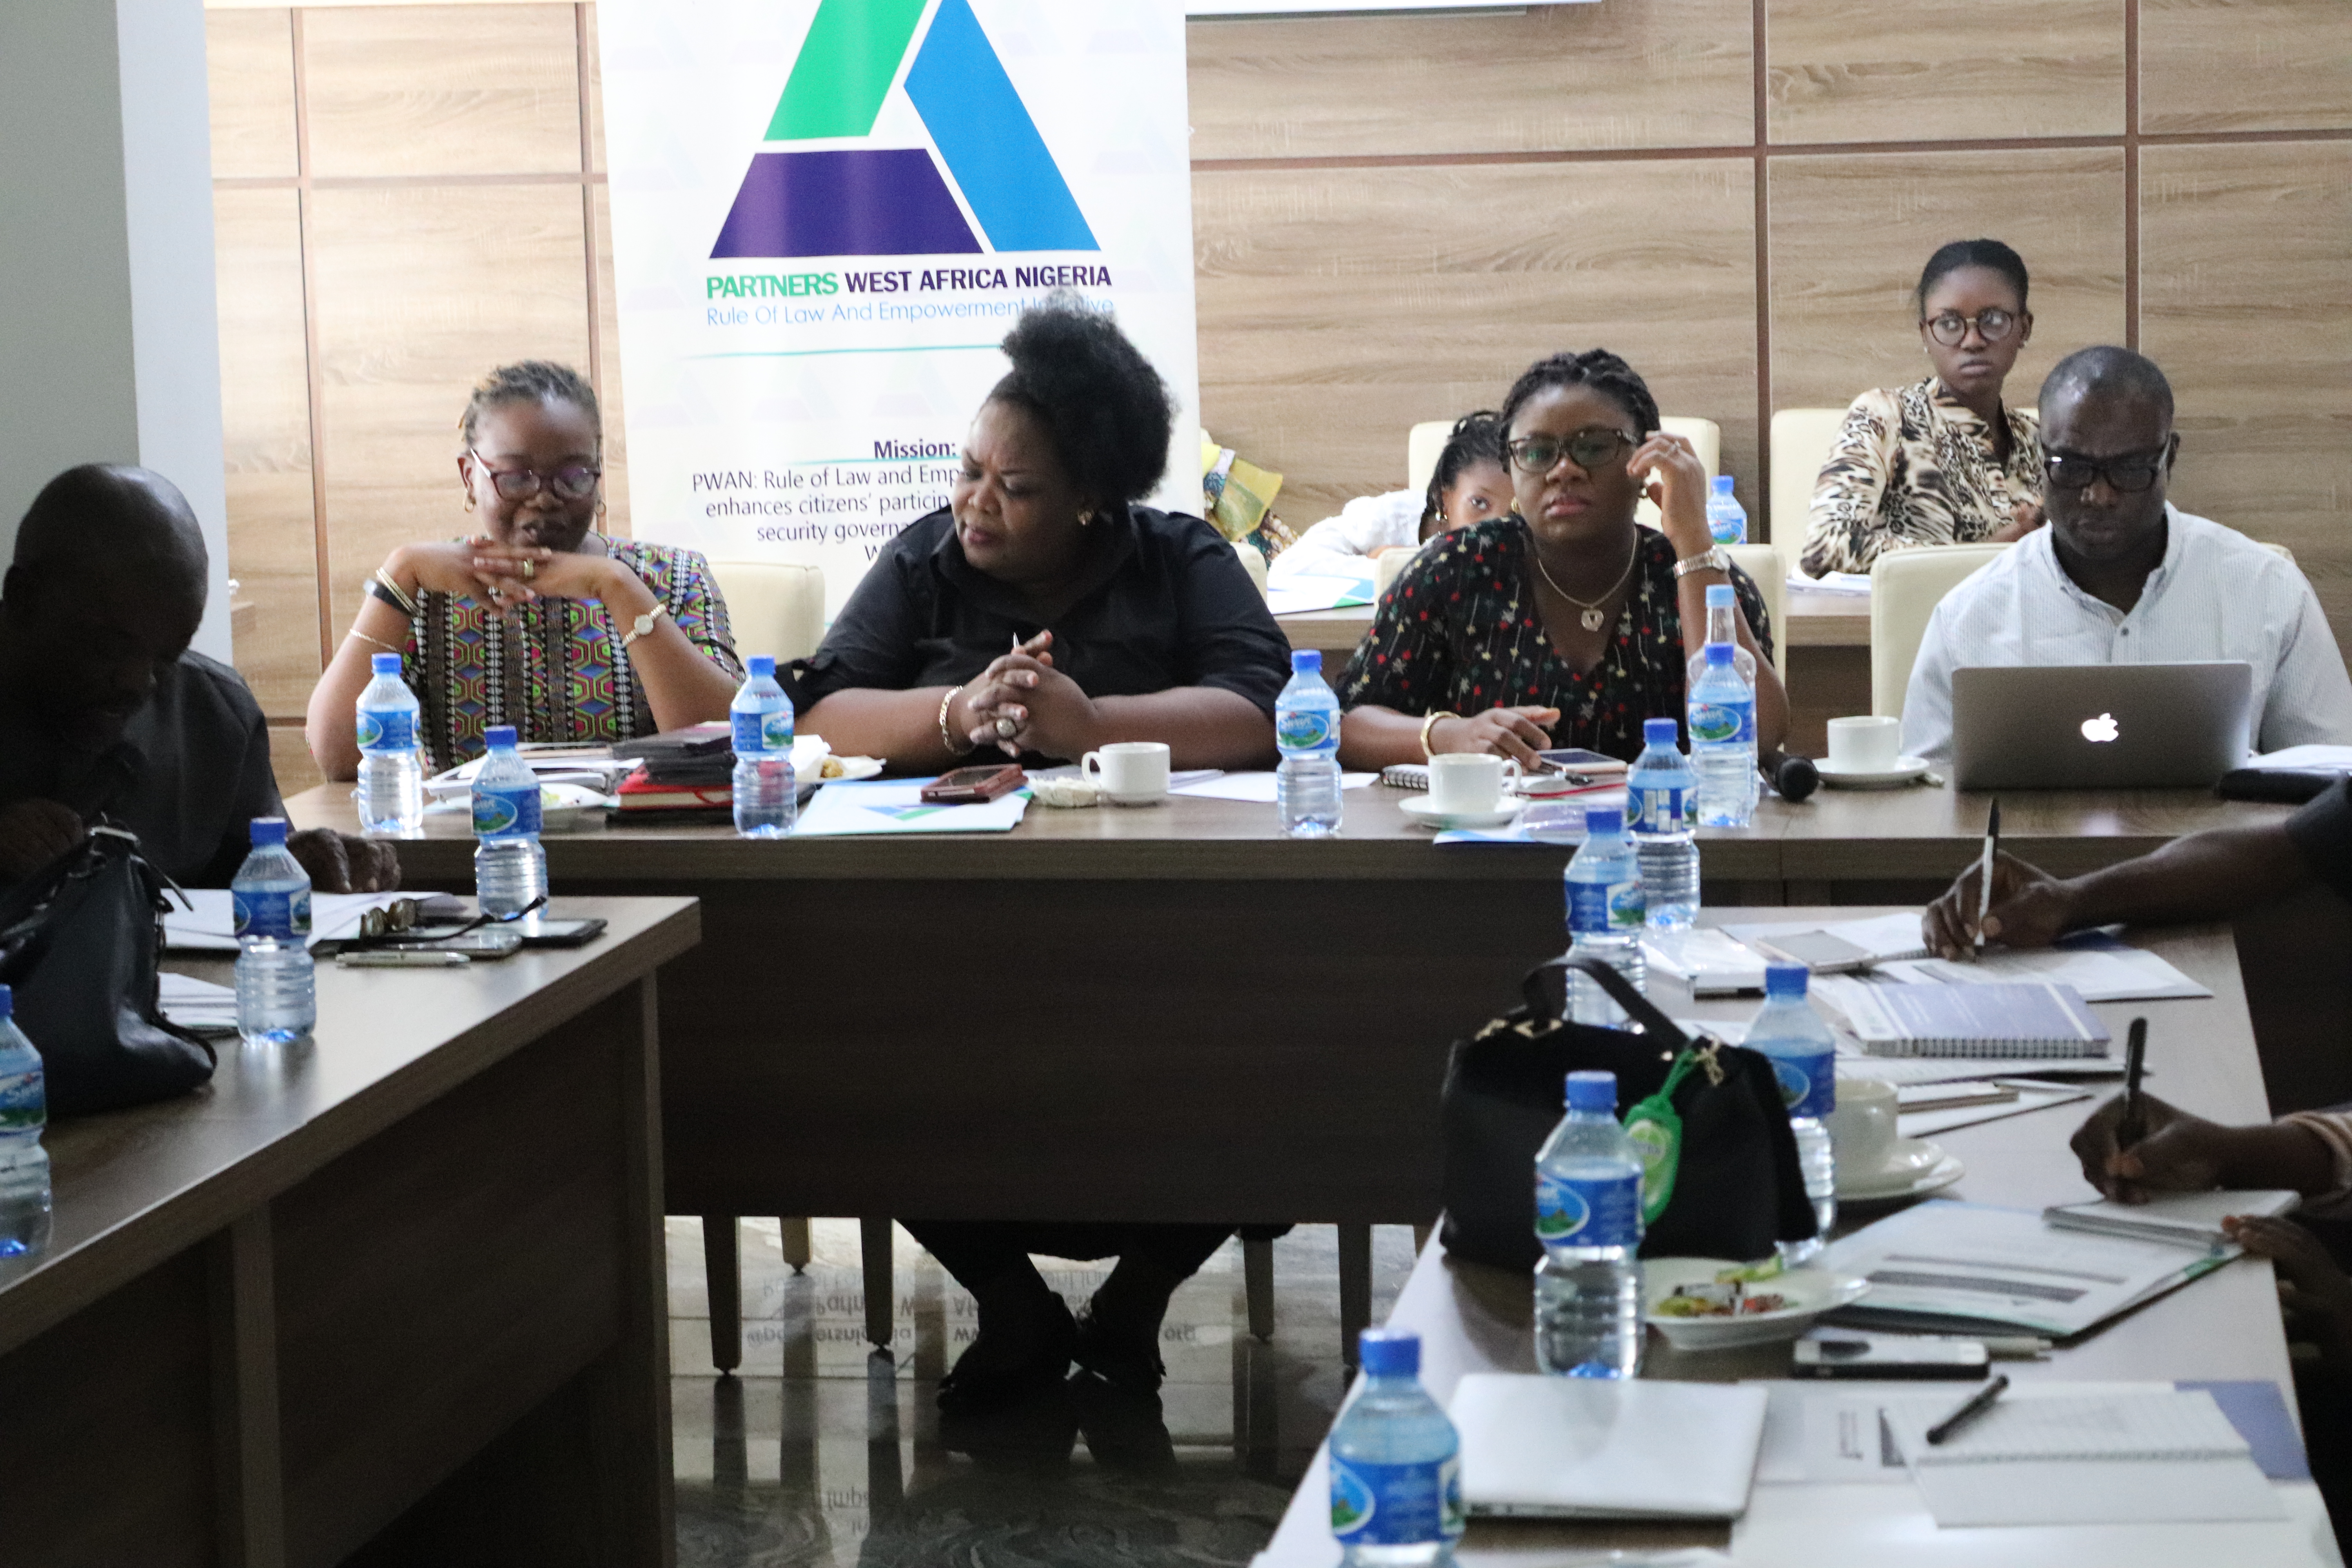 VALIDATION WORKSHOP ON BEYOND VOTING: INCREASING WOMEN’S PARTICIPATION IN THE POLITICAL PROCESS